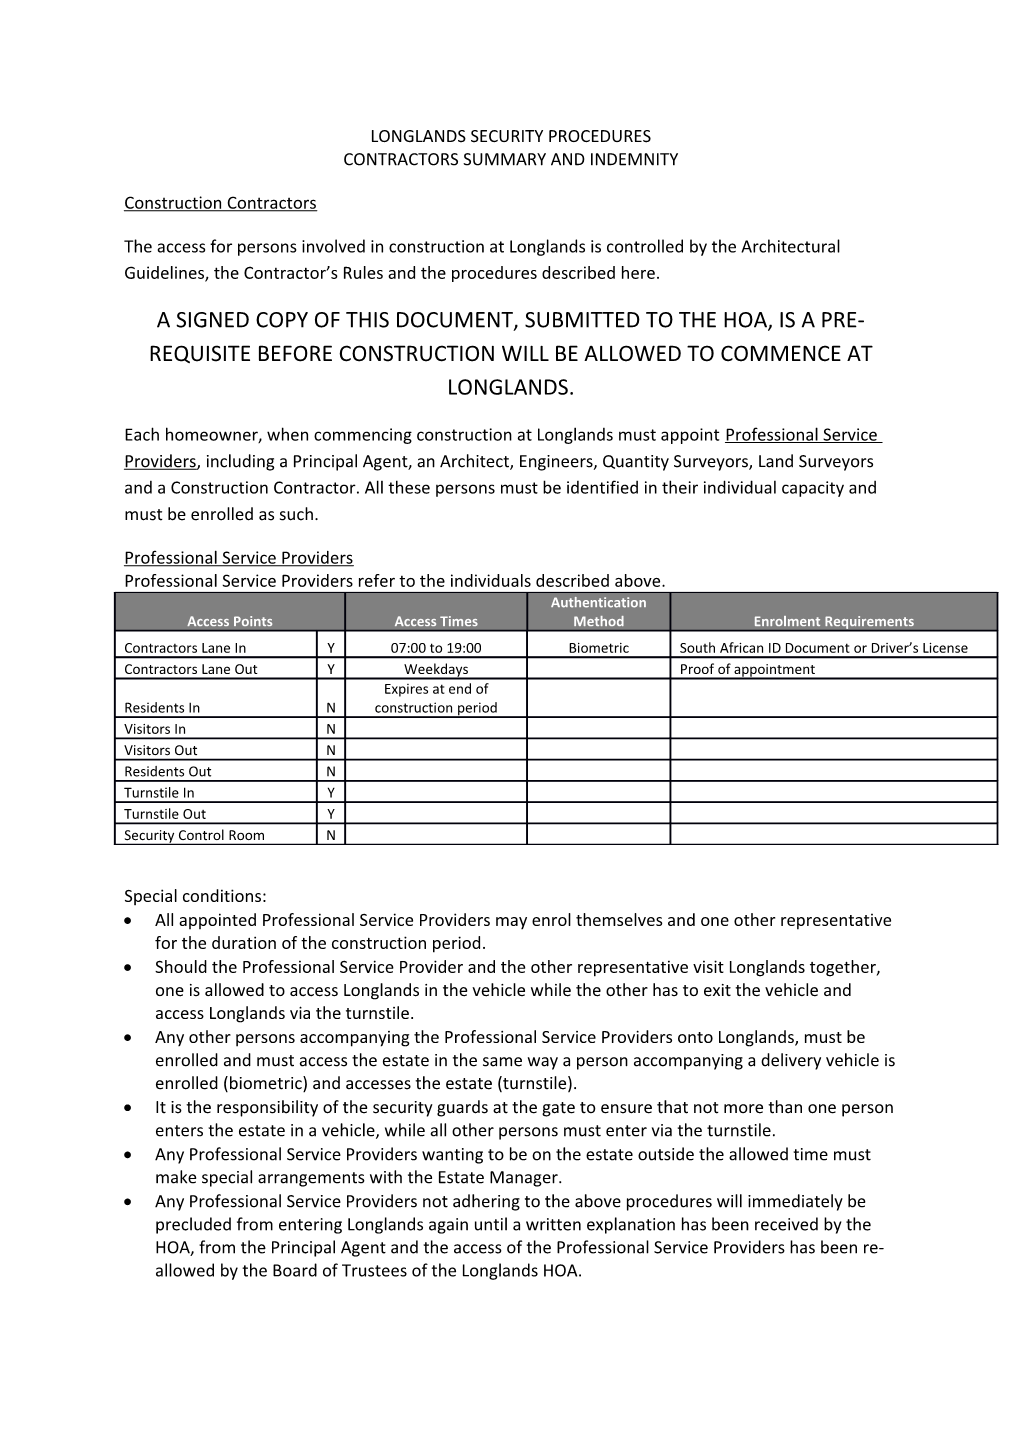 Contractors Summary and Indemnity